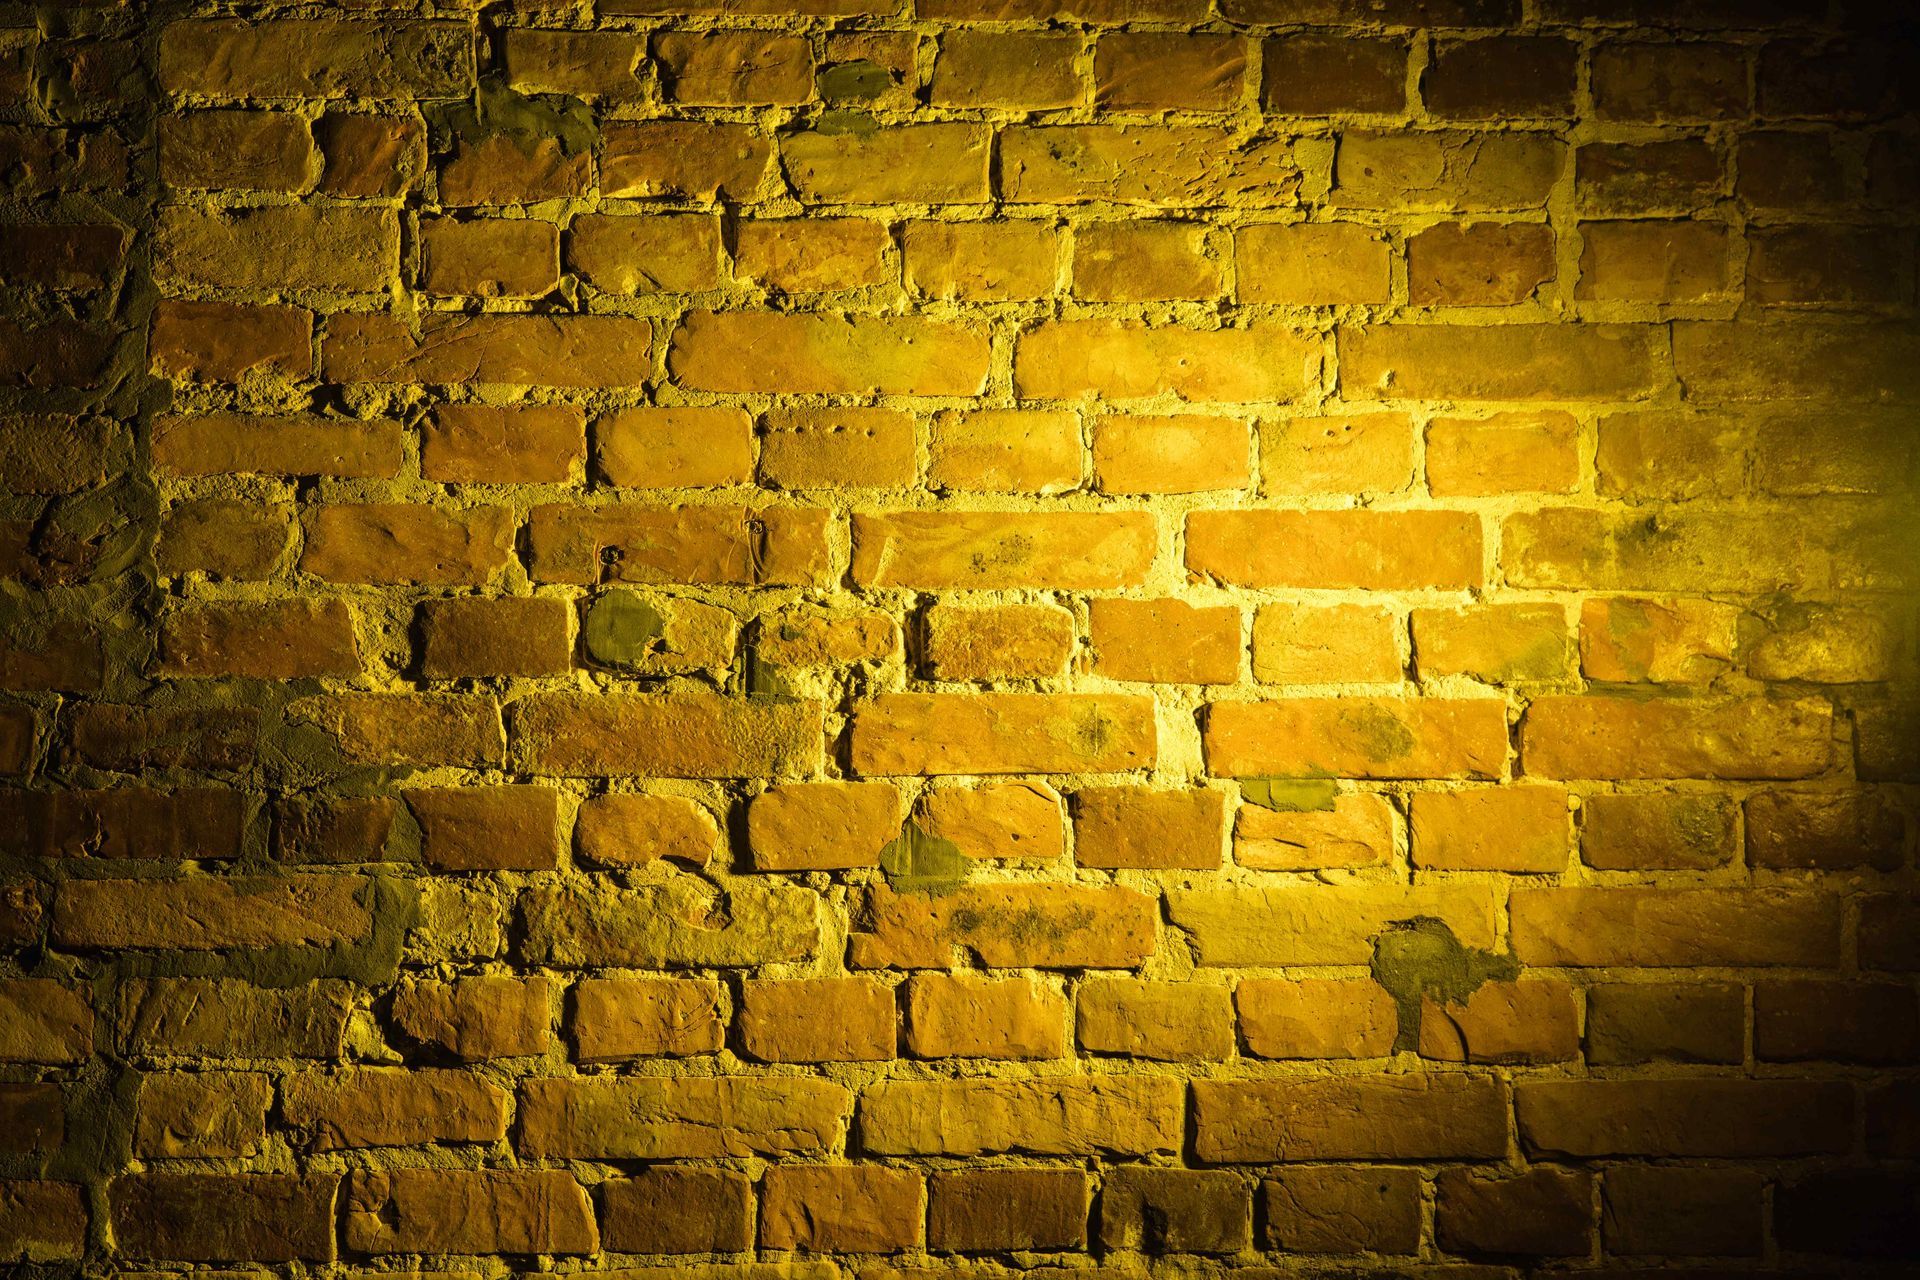 A harshly lit old brick wall.